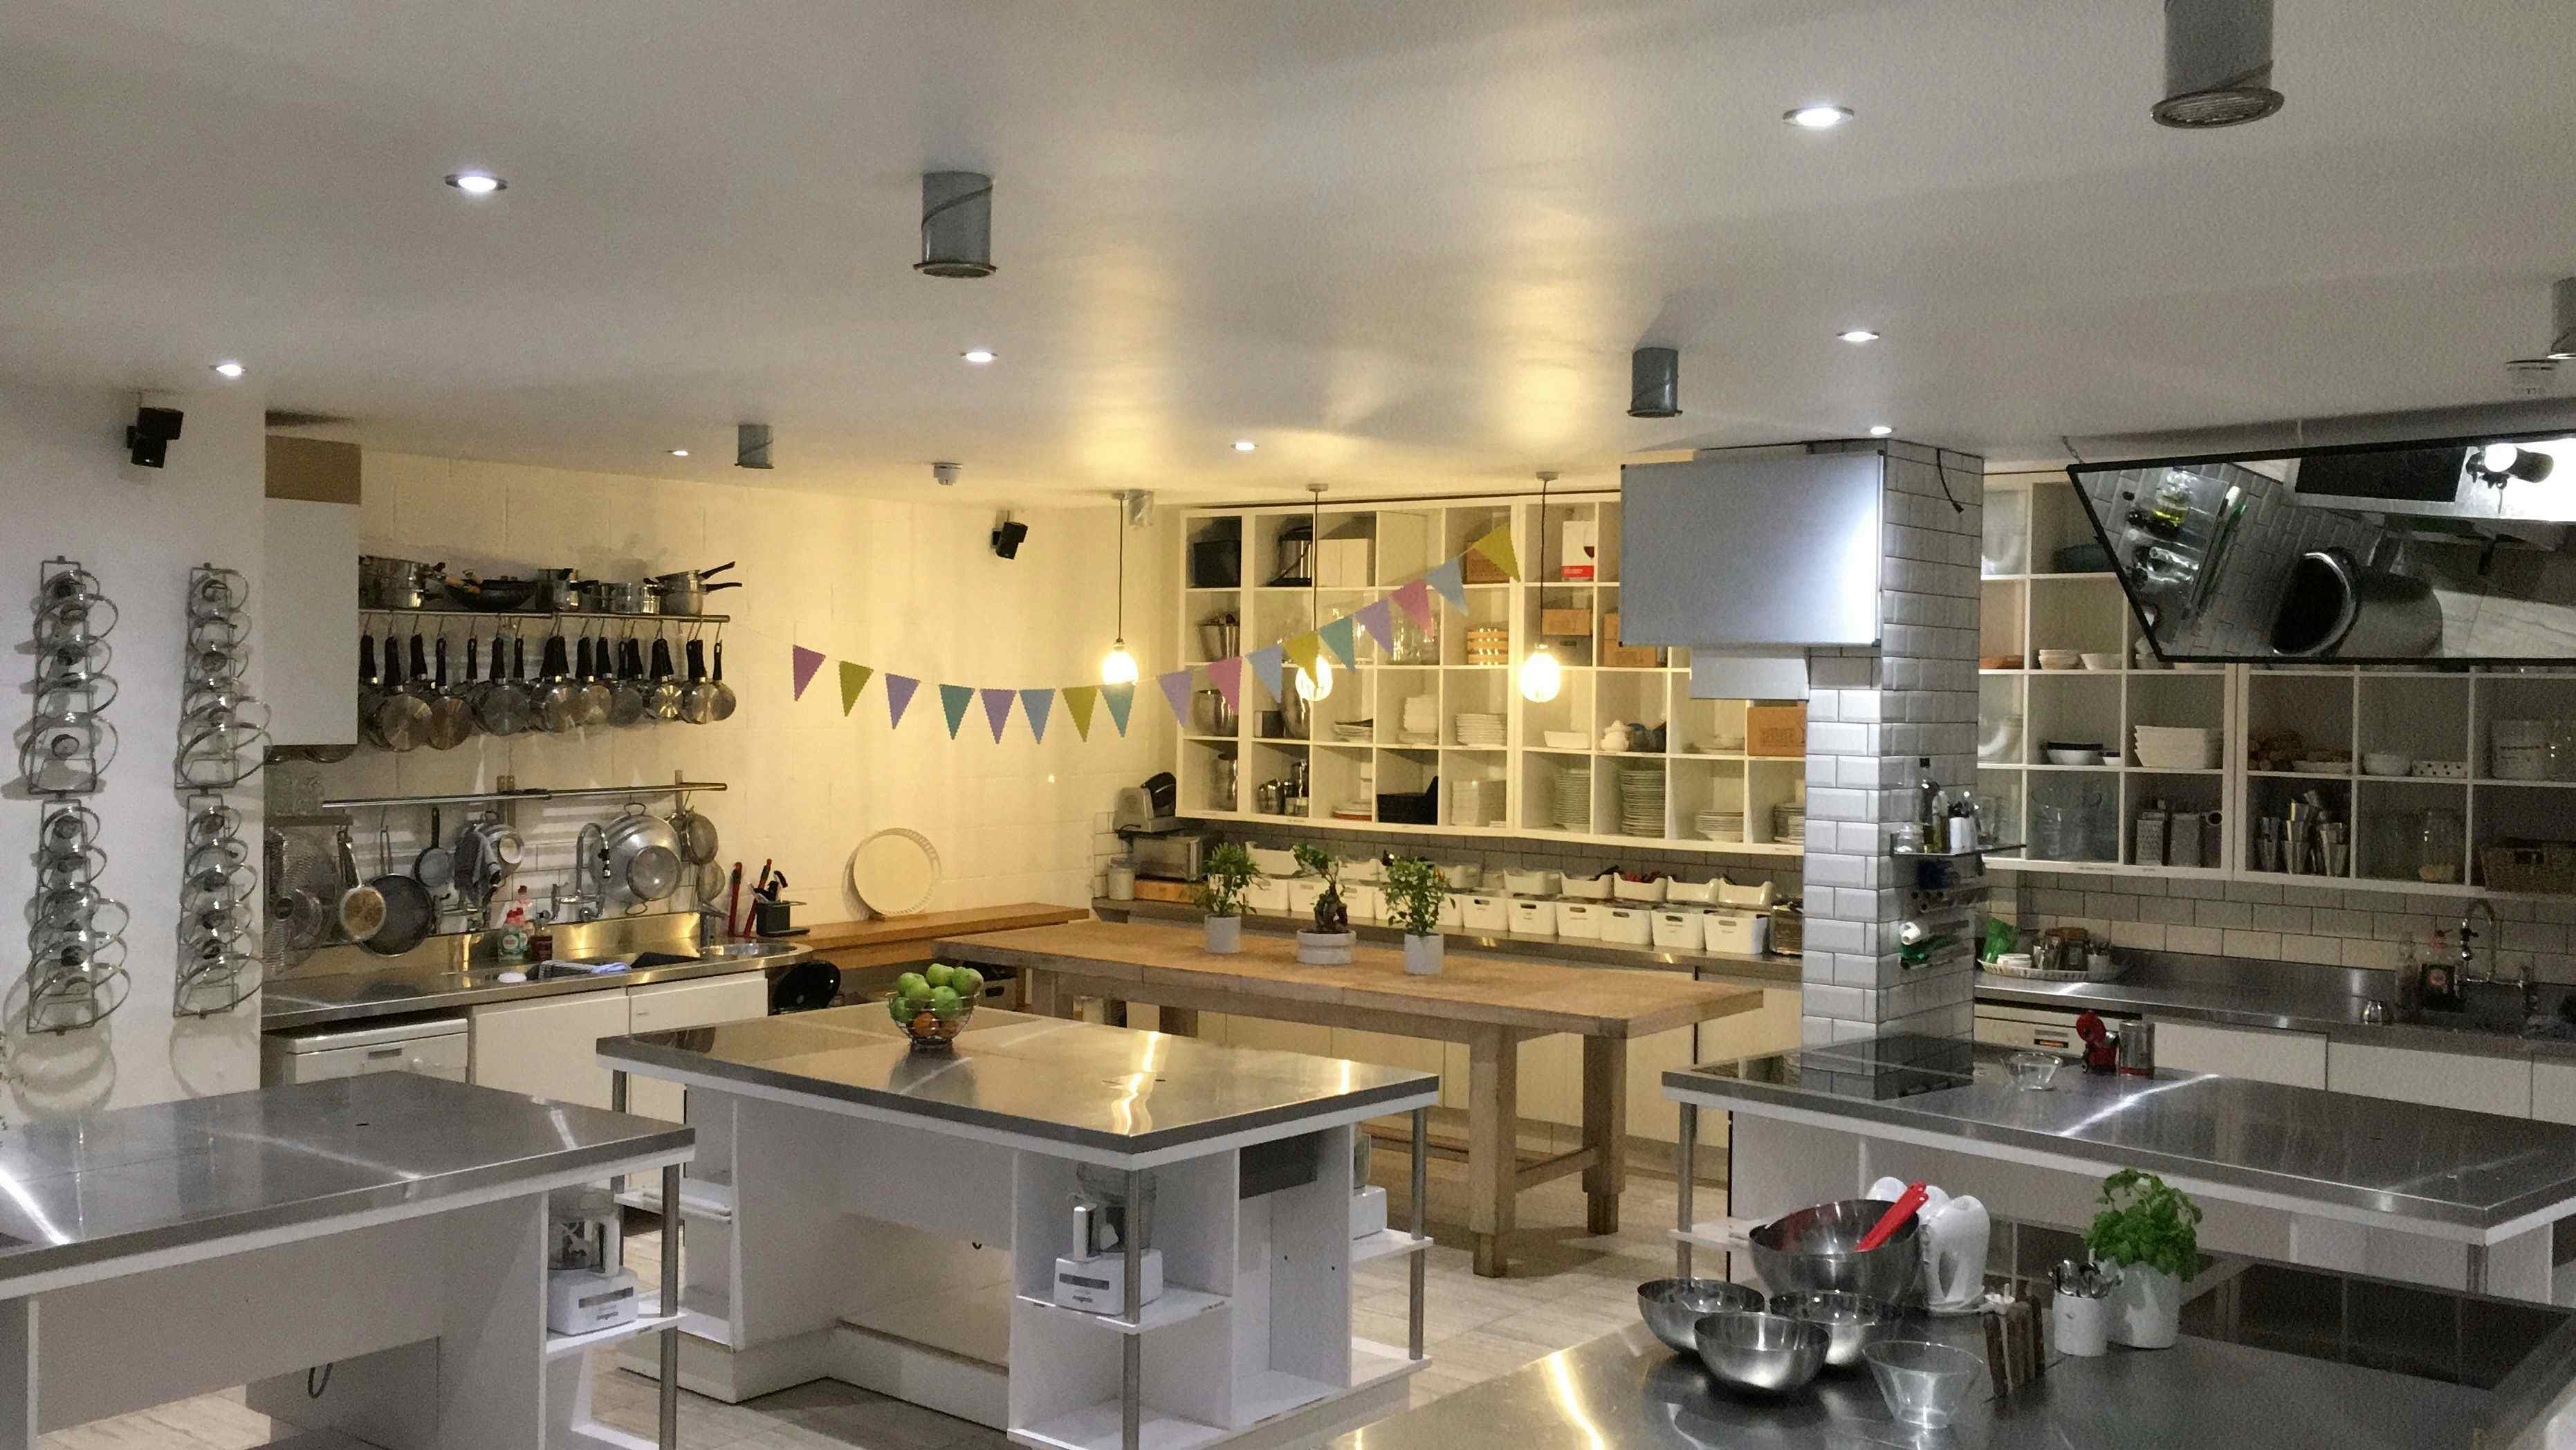 Kitchen Hire/Cookery School, The Avenue Cookery School